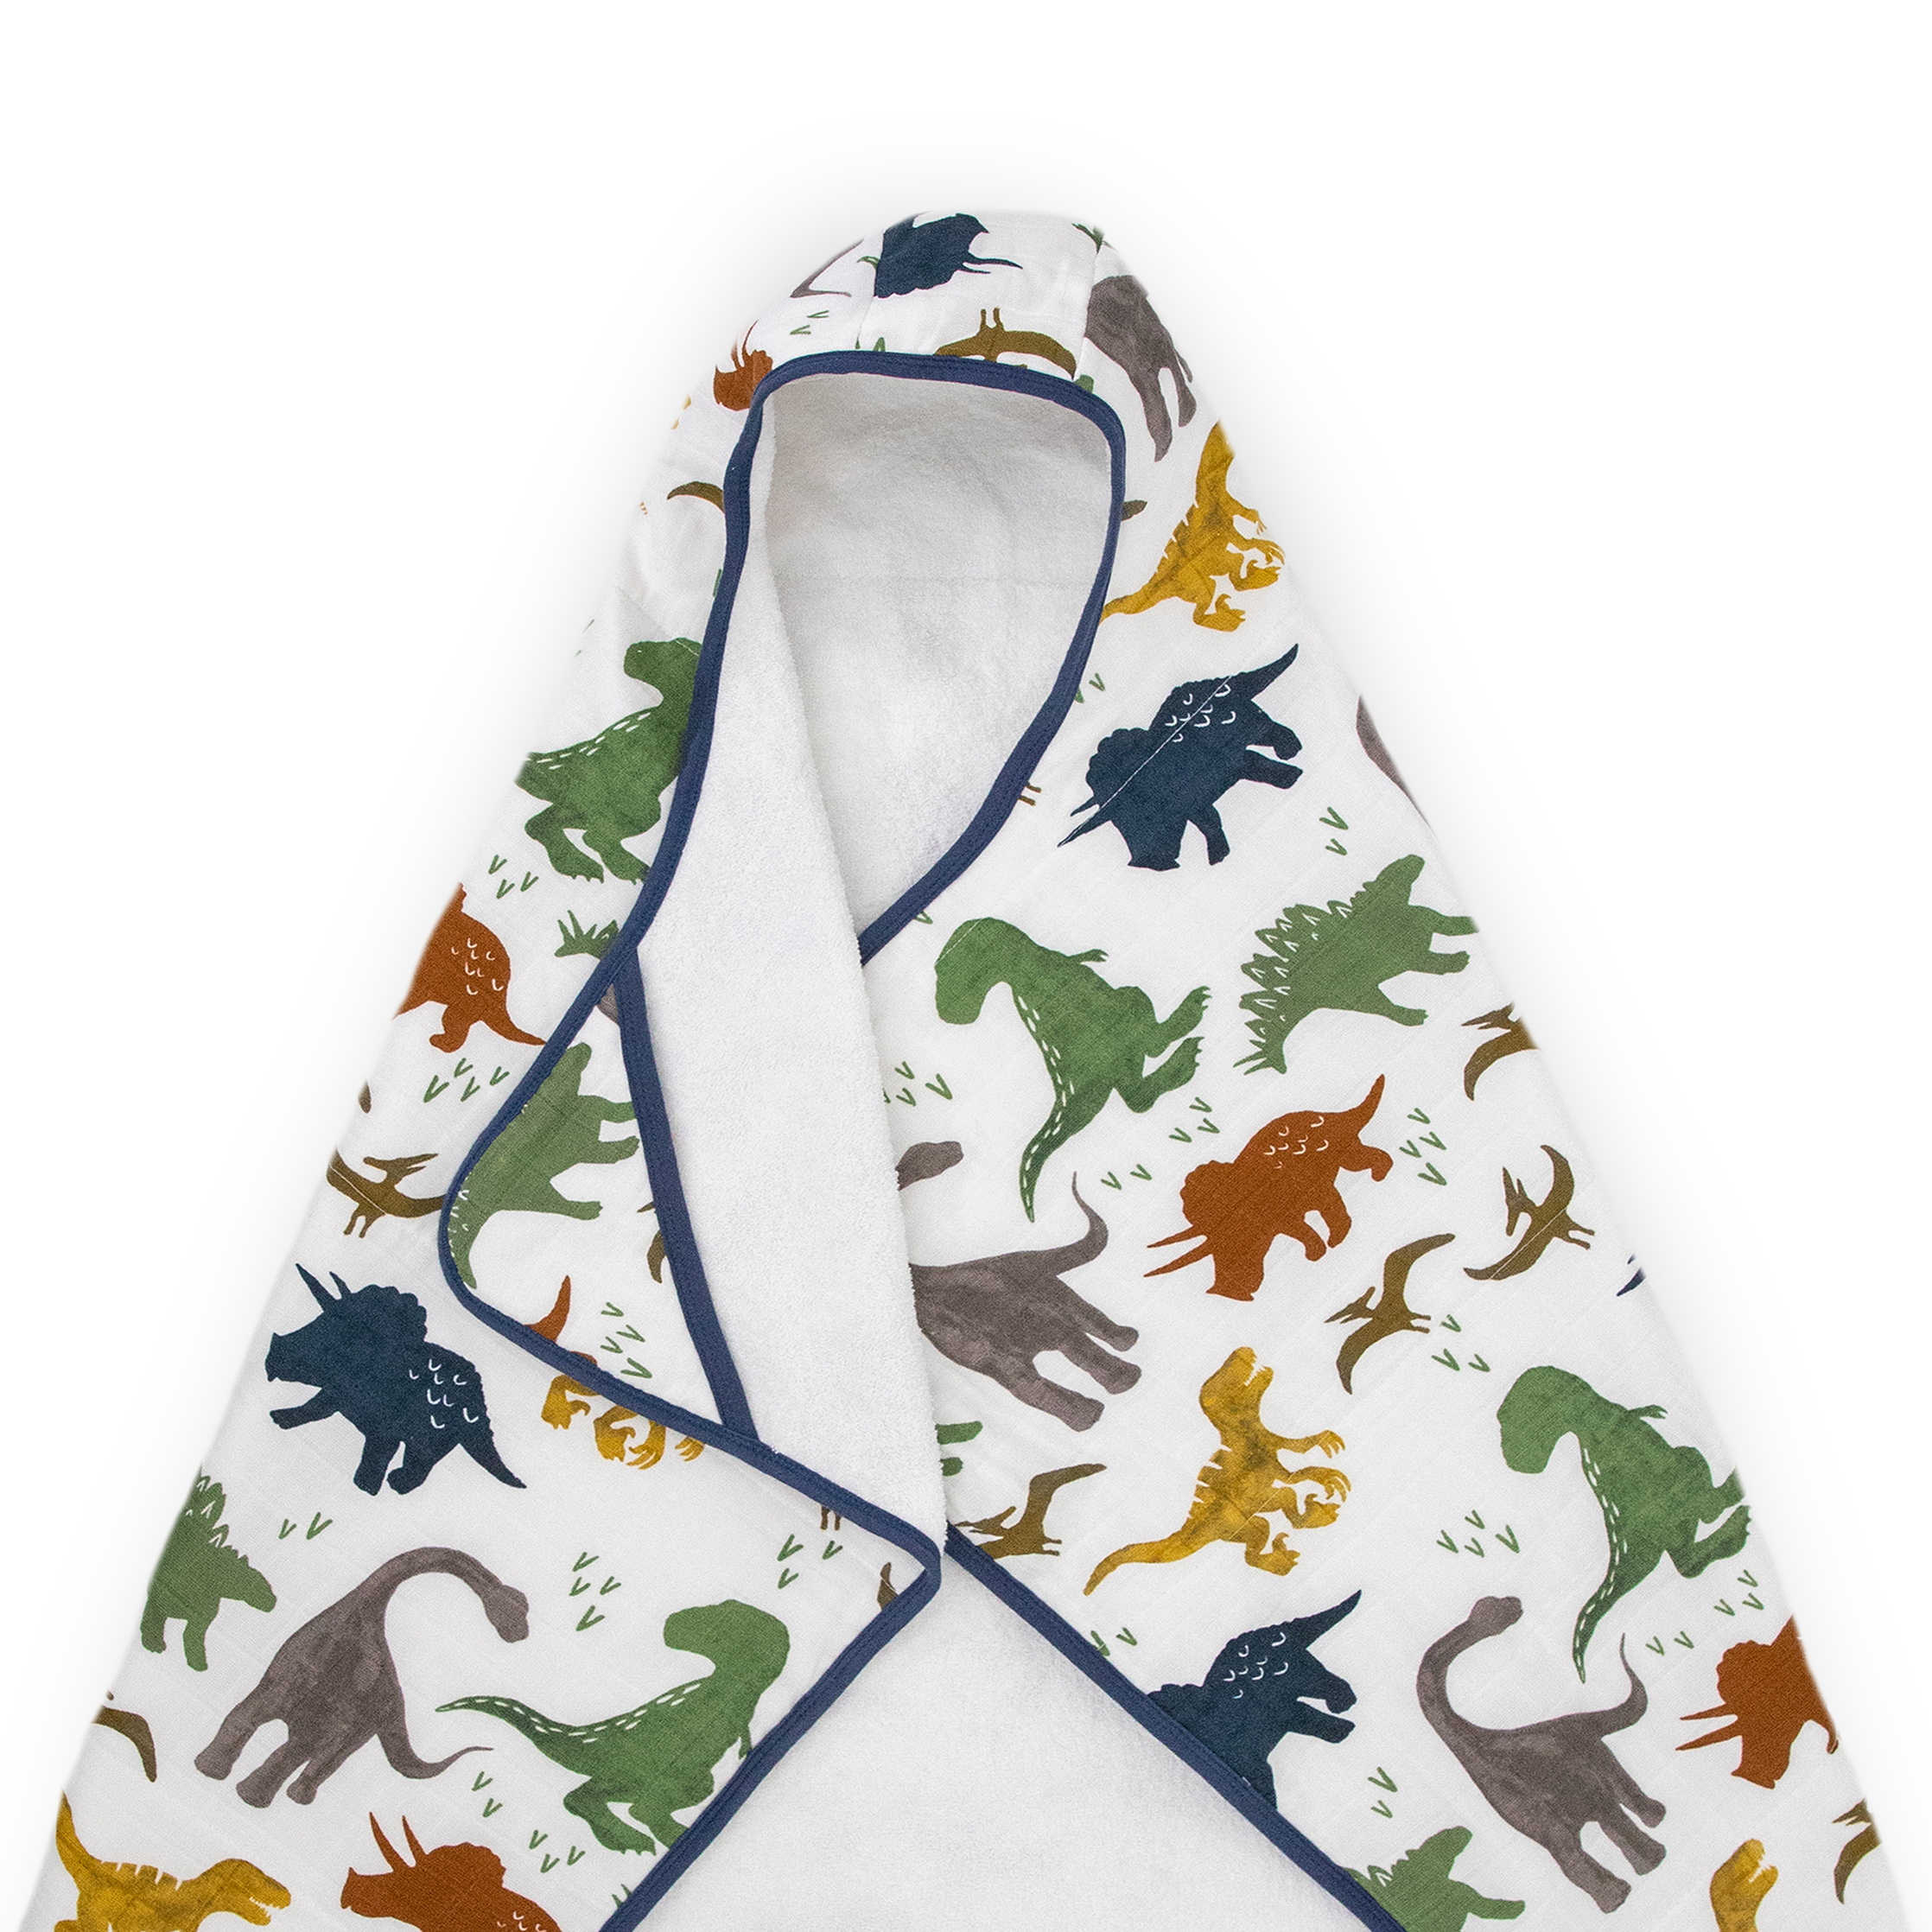 Toddler Hooded Towel - Dino Friends